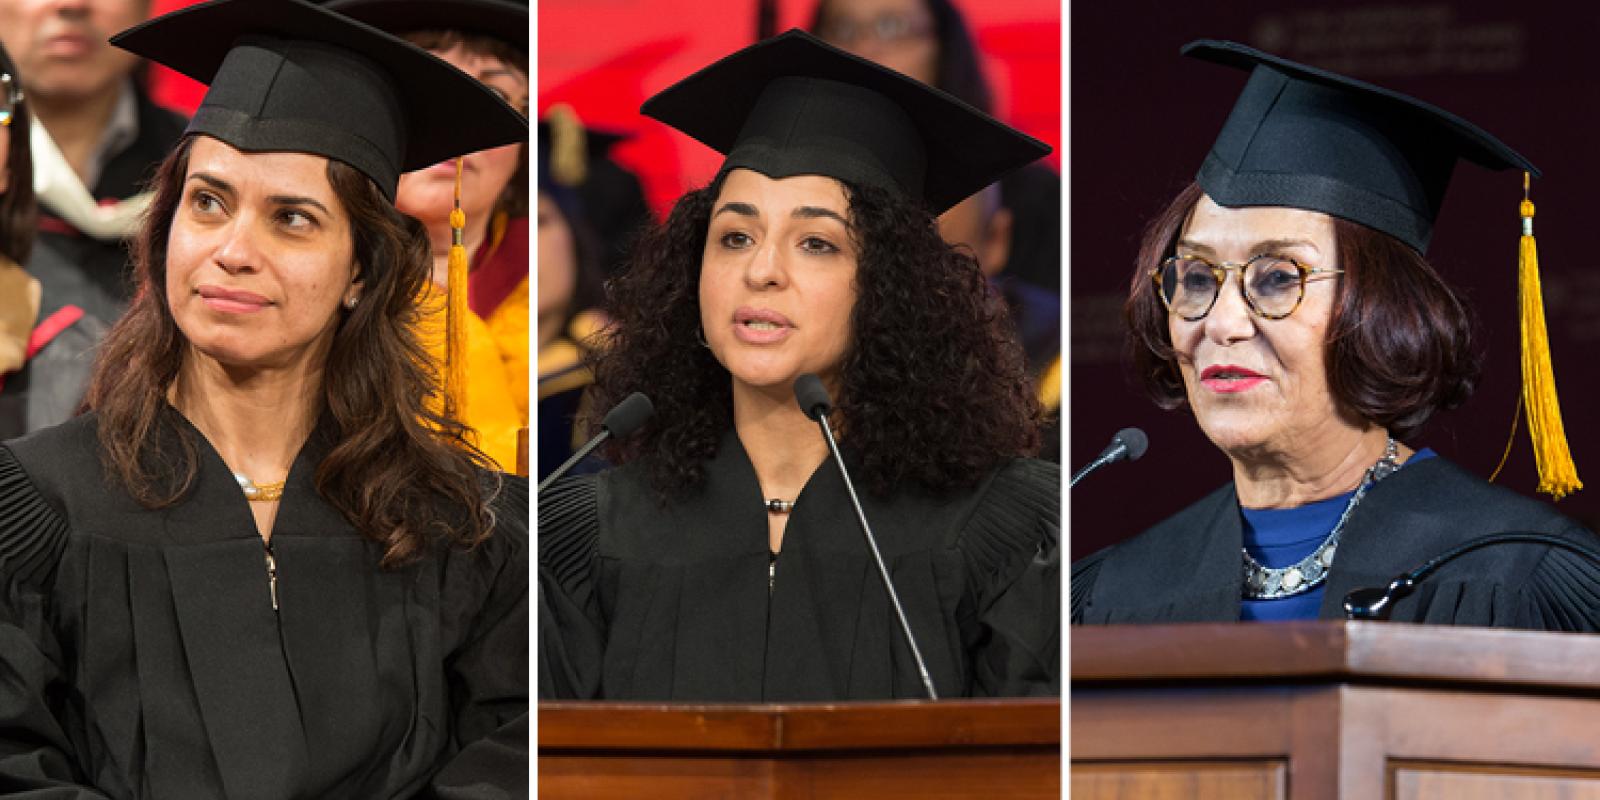 AUC alumnae and Diwan Bookstore co-founders Hind (left) and Nadia (middle) Wassef, as well as jewelry designer and honorary degree recipient Azza Fahmy, spoke at commencement this weekend